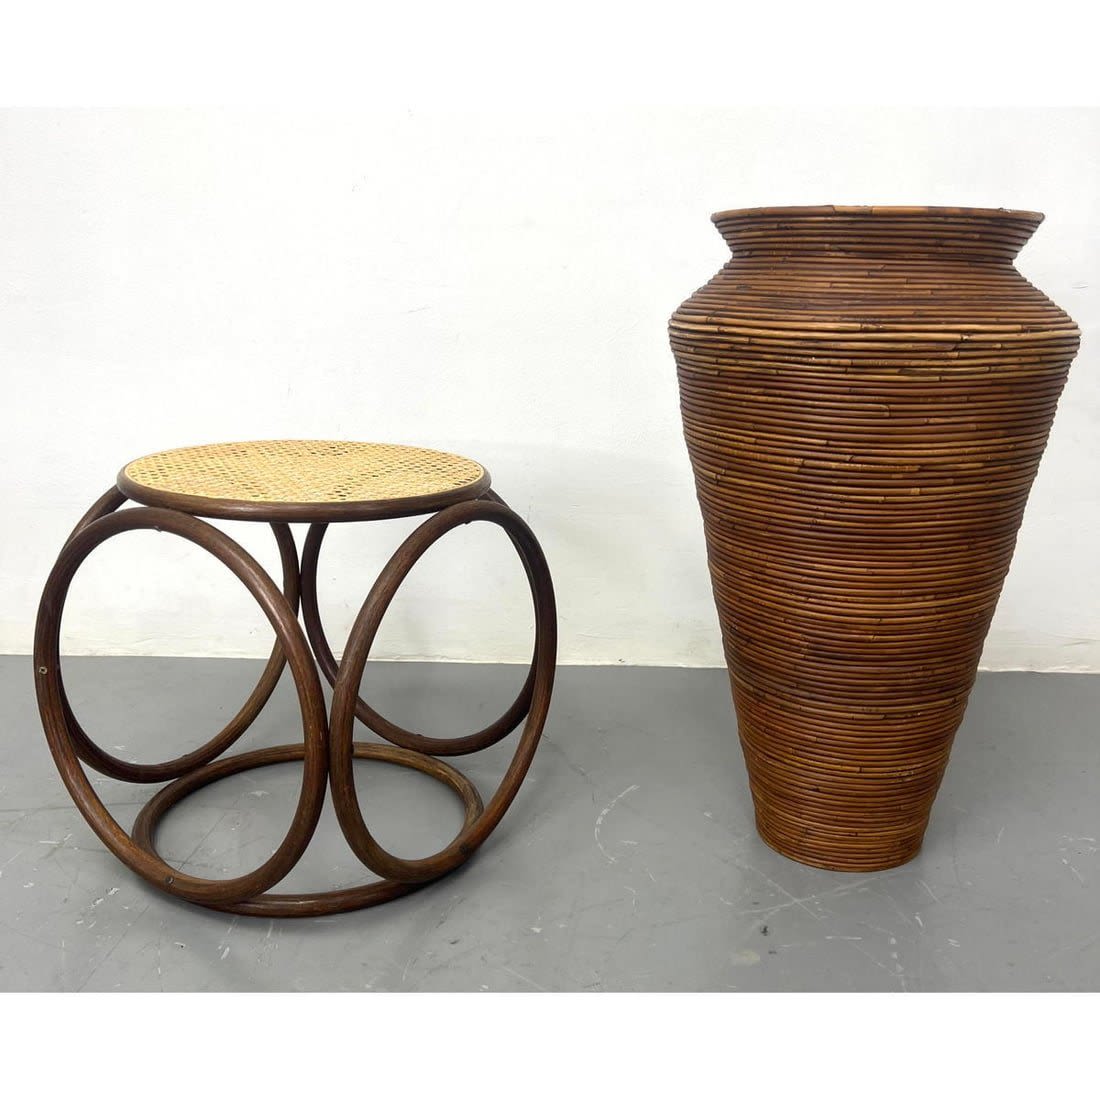 2pc Wicker and Bamboo Items Thonet 362d7e